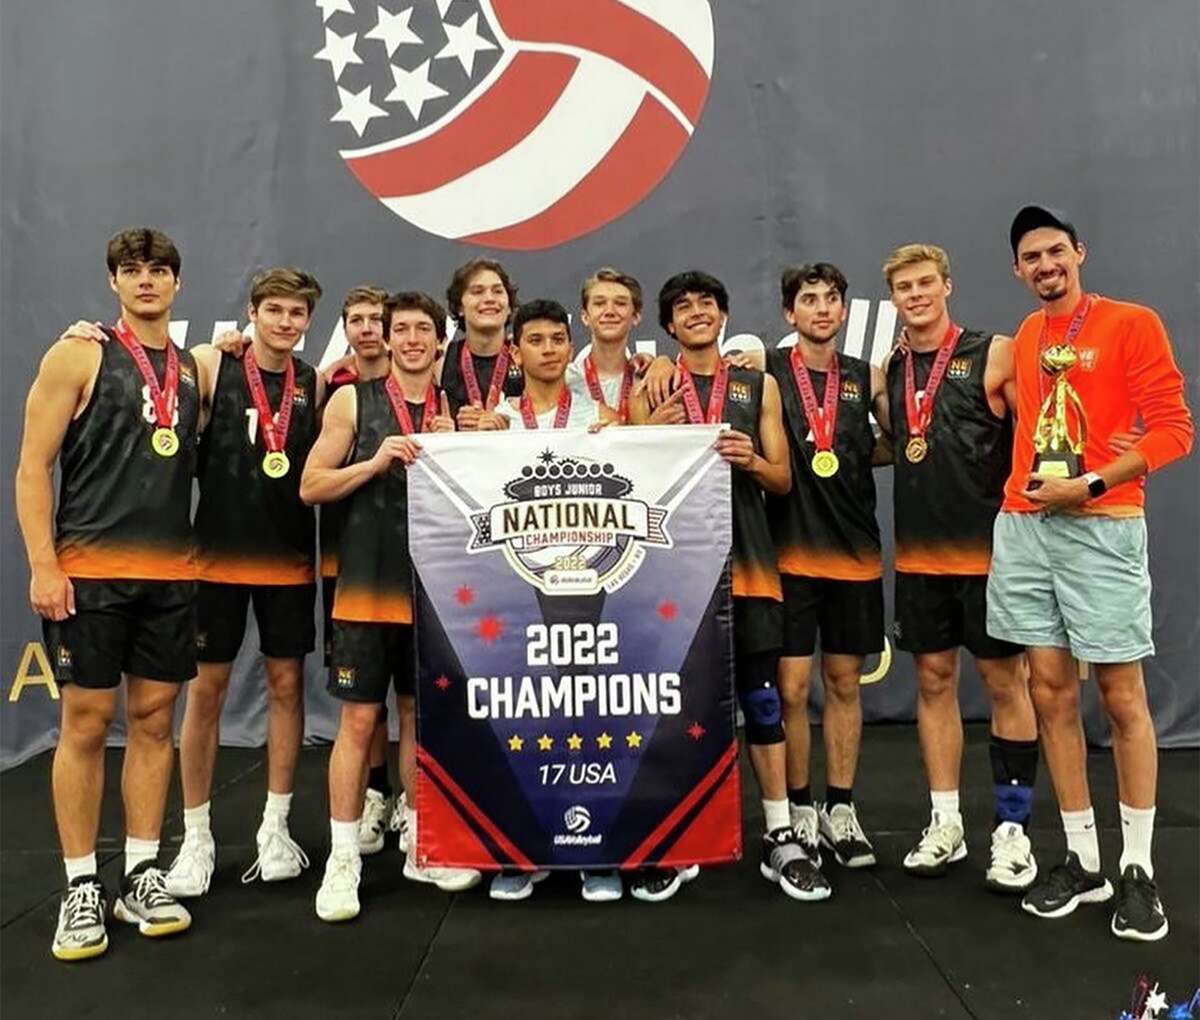 The Northeast Volleyball Club 17-1 team won the 17 USA Division at the USA Voleyball Boys Junior National Championships in Las Vegas on July 7.